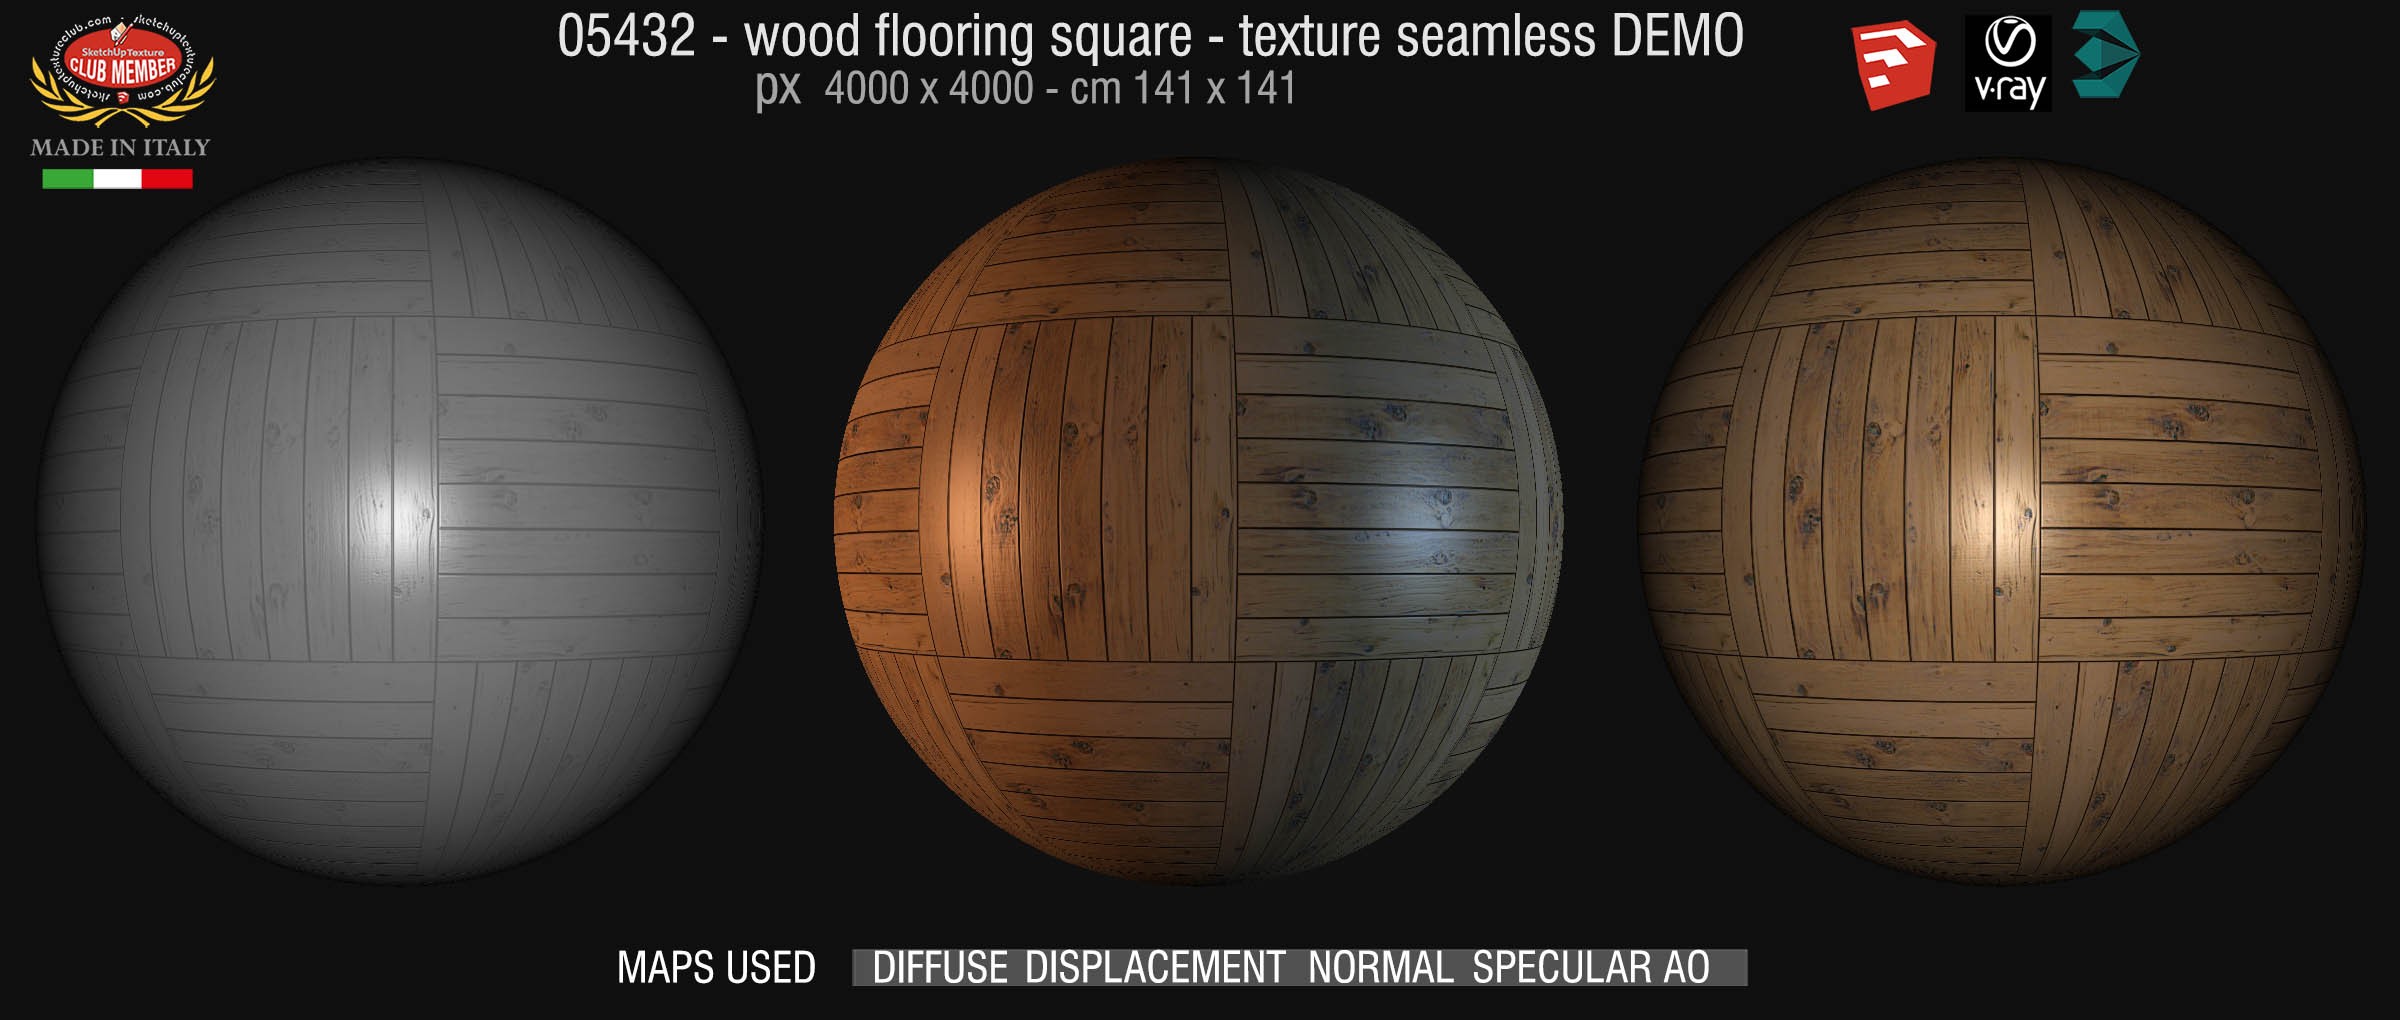 05432 Wood flooring square texture seamless + maps DEMO